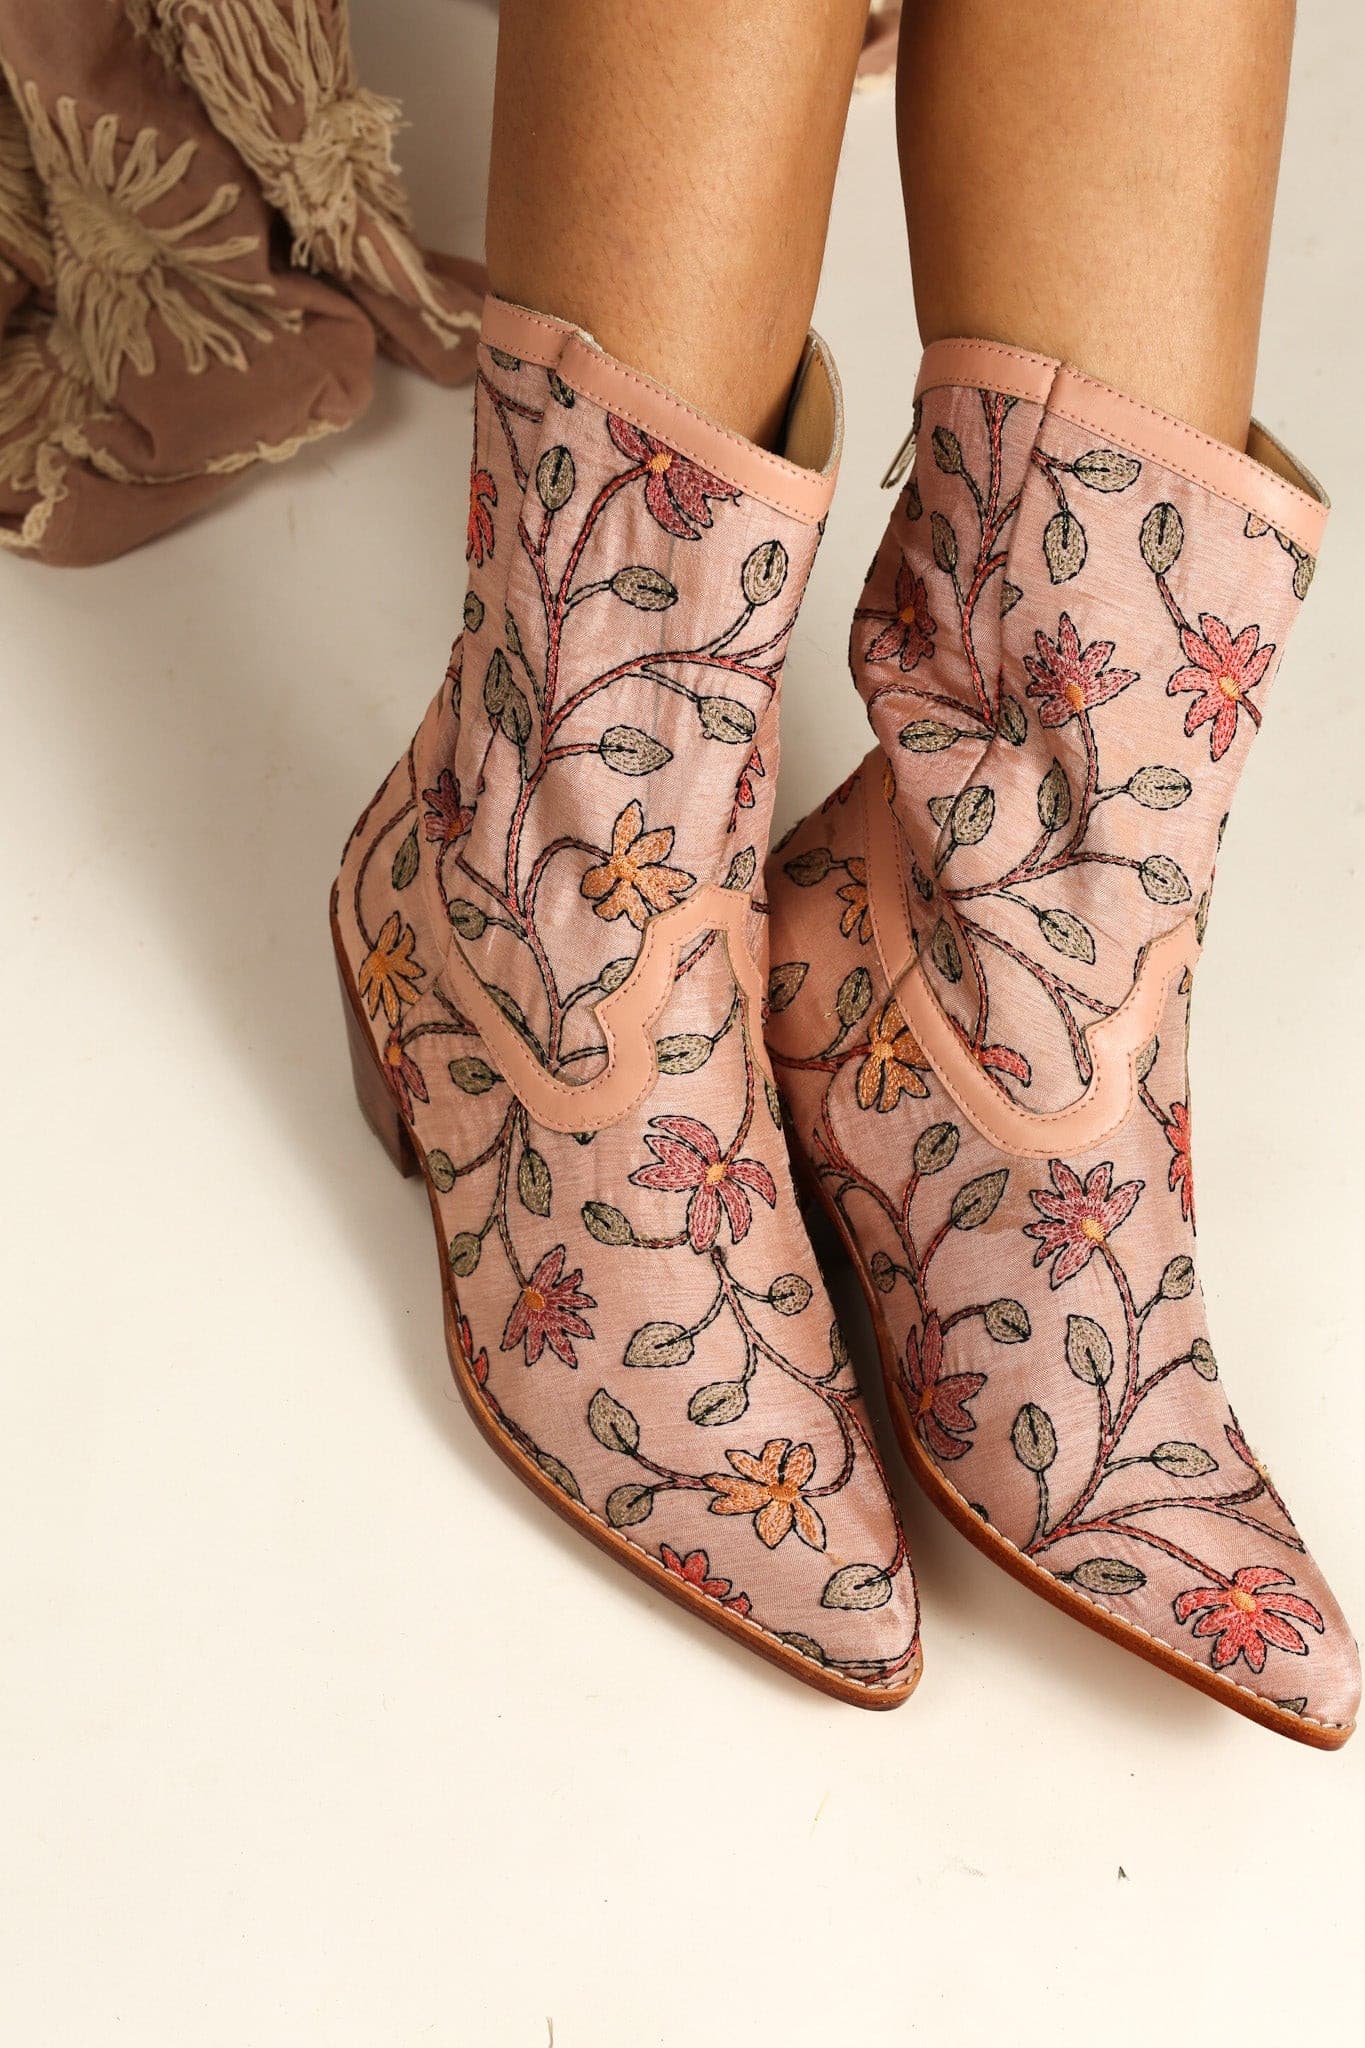 EMBROIDERED BOOTS BEATA - sustainably made MOMO NEW YORK sustainable clothing, boots slow fashion